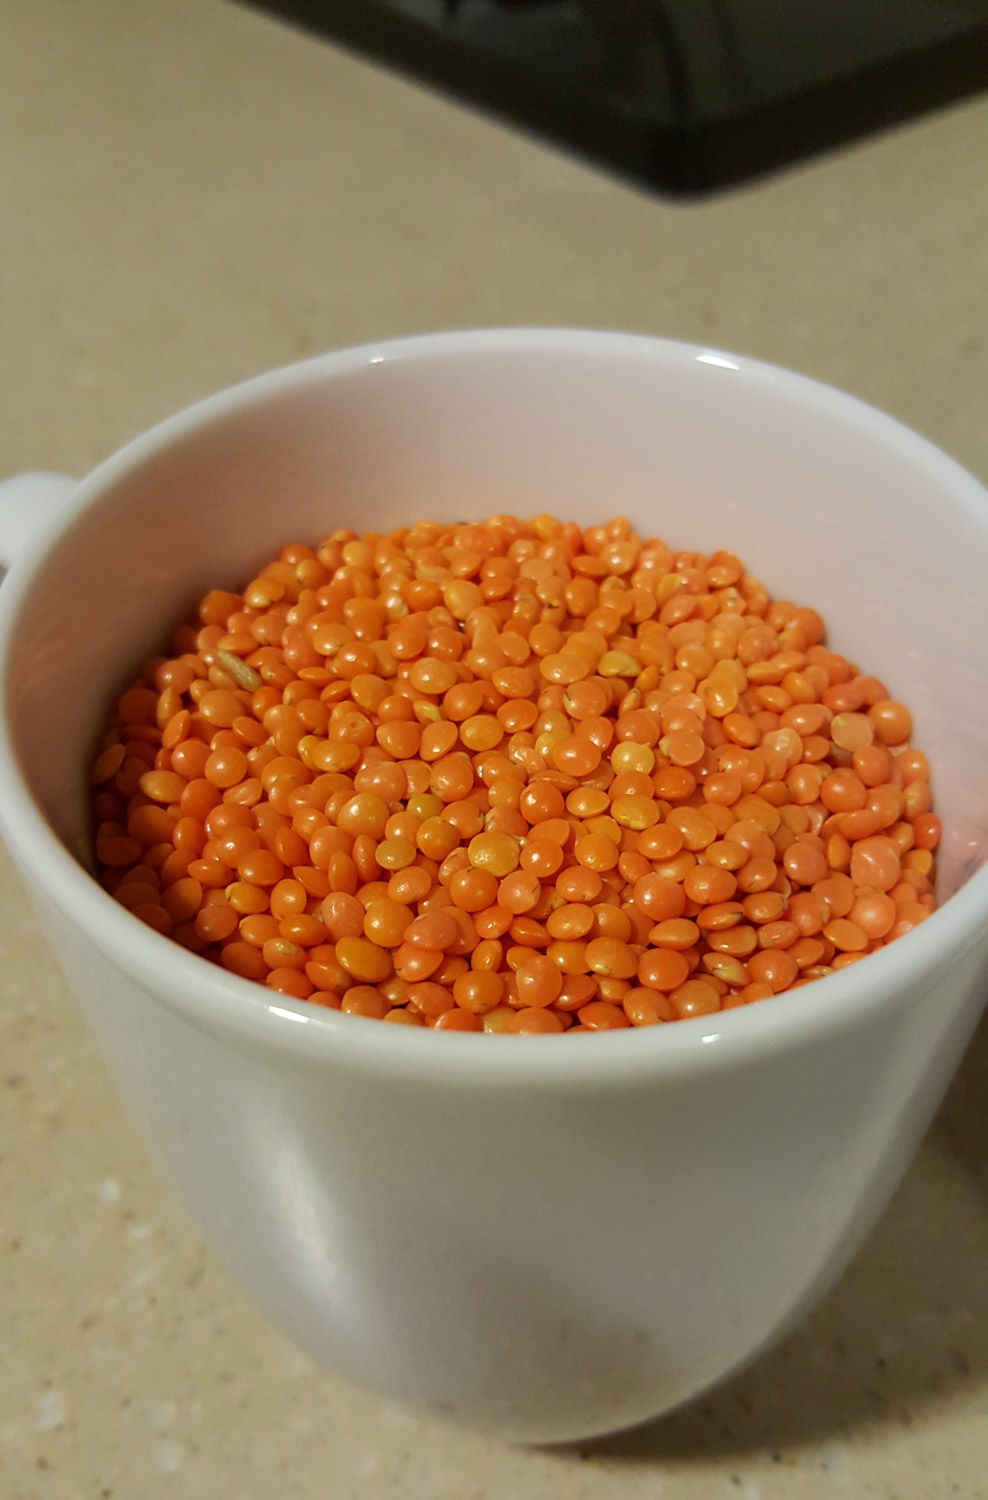 Lentils are different here.